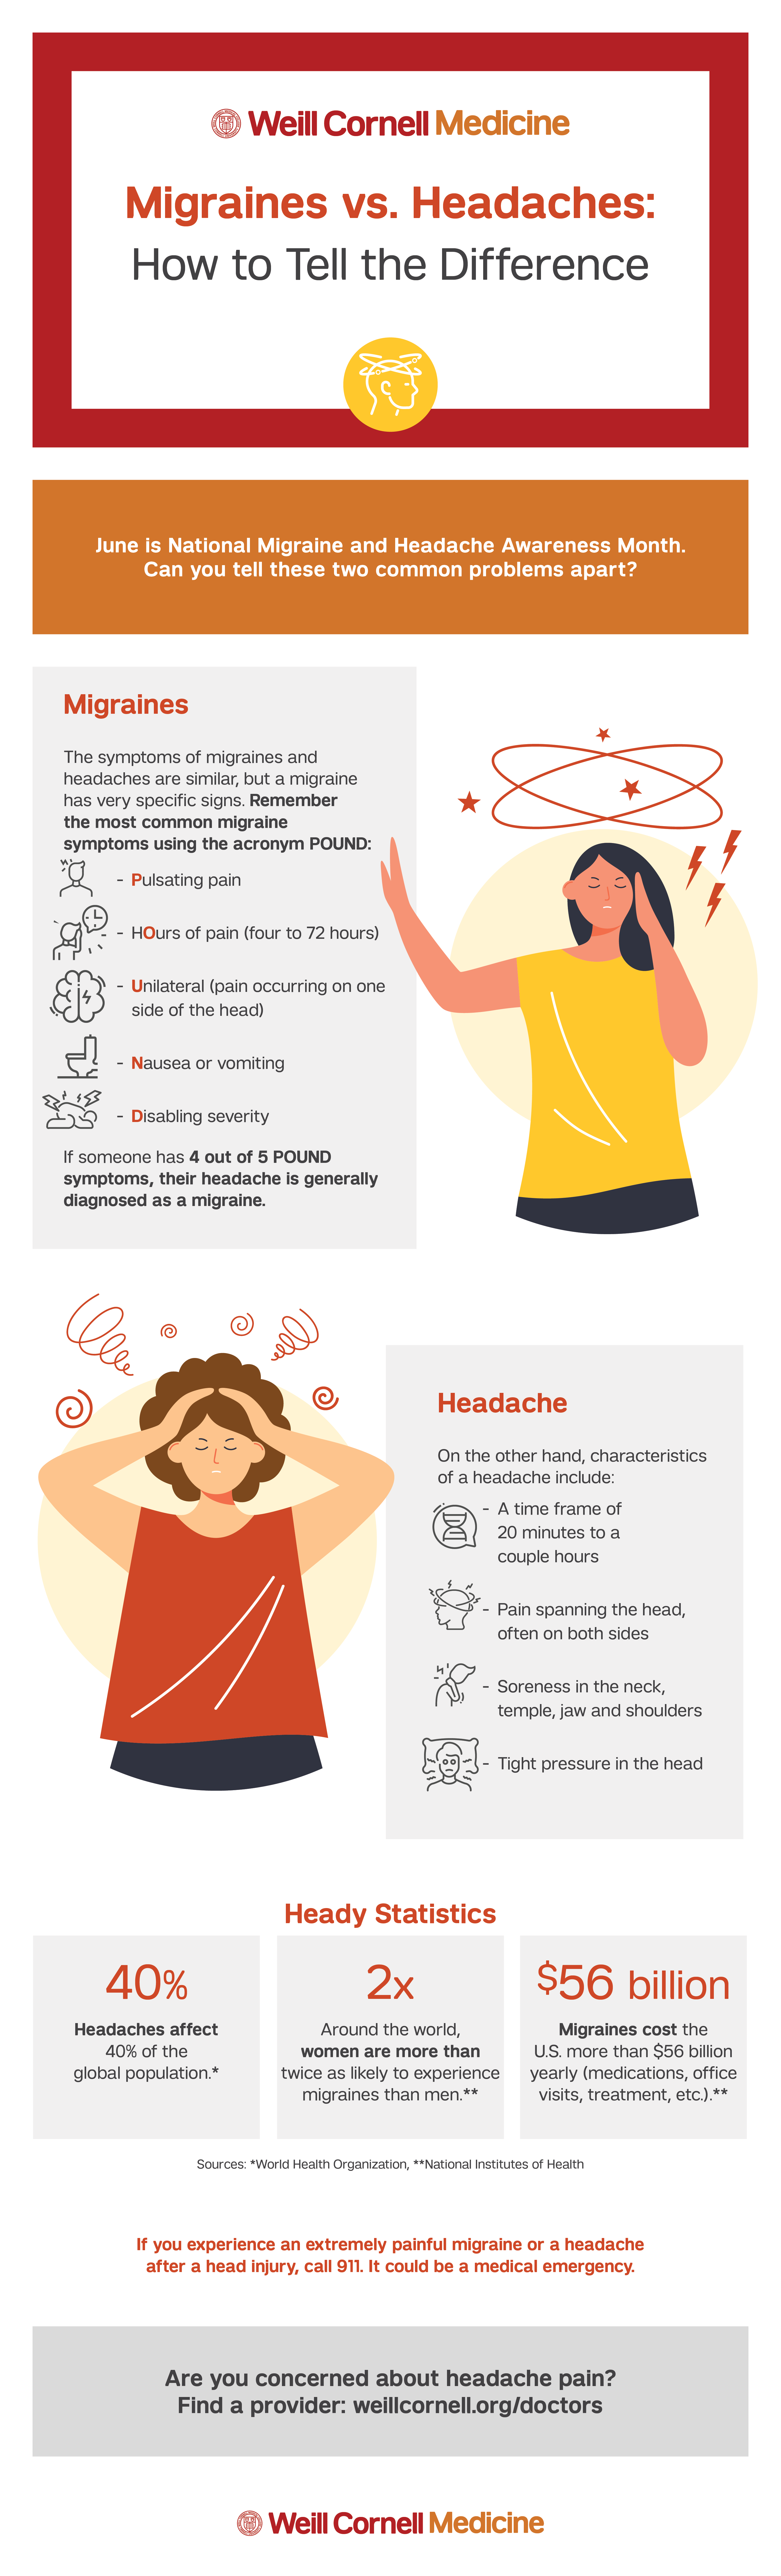 National Migraine and Headache Awareness Month